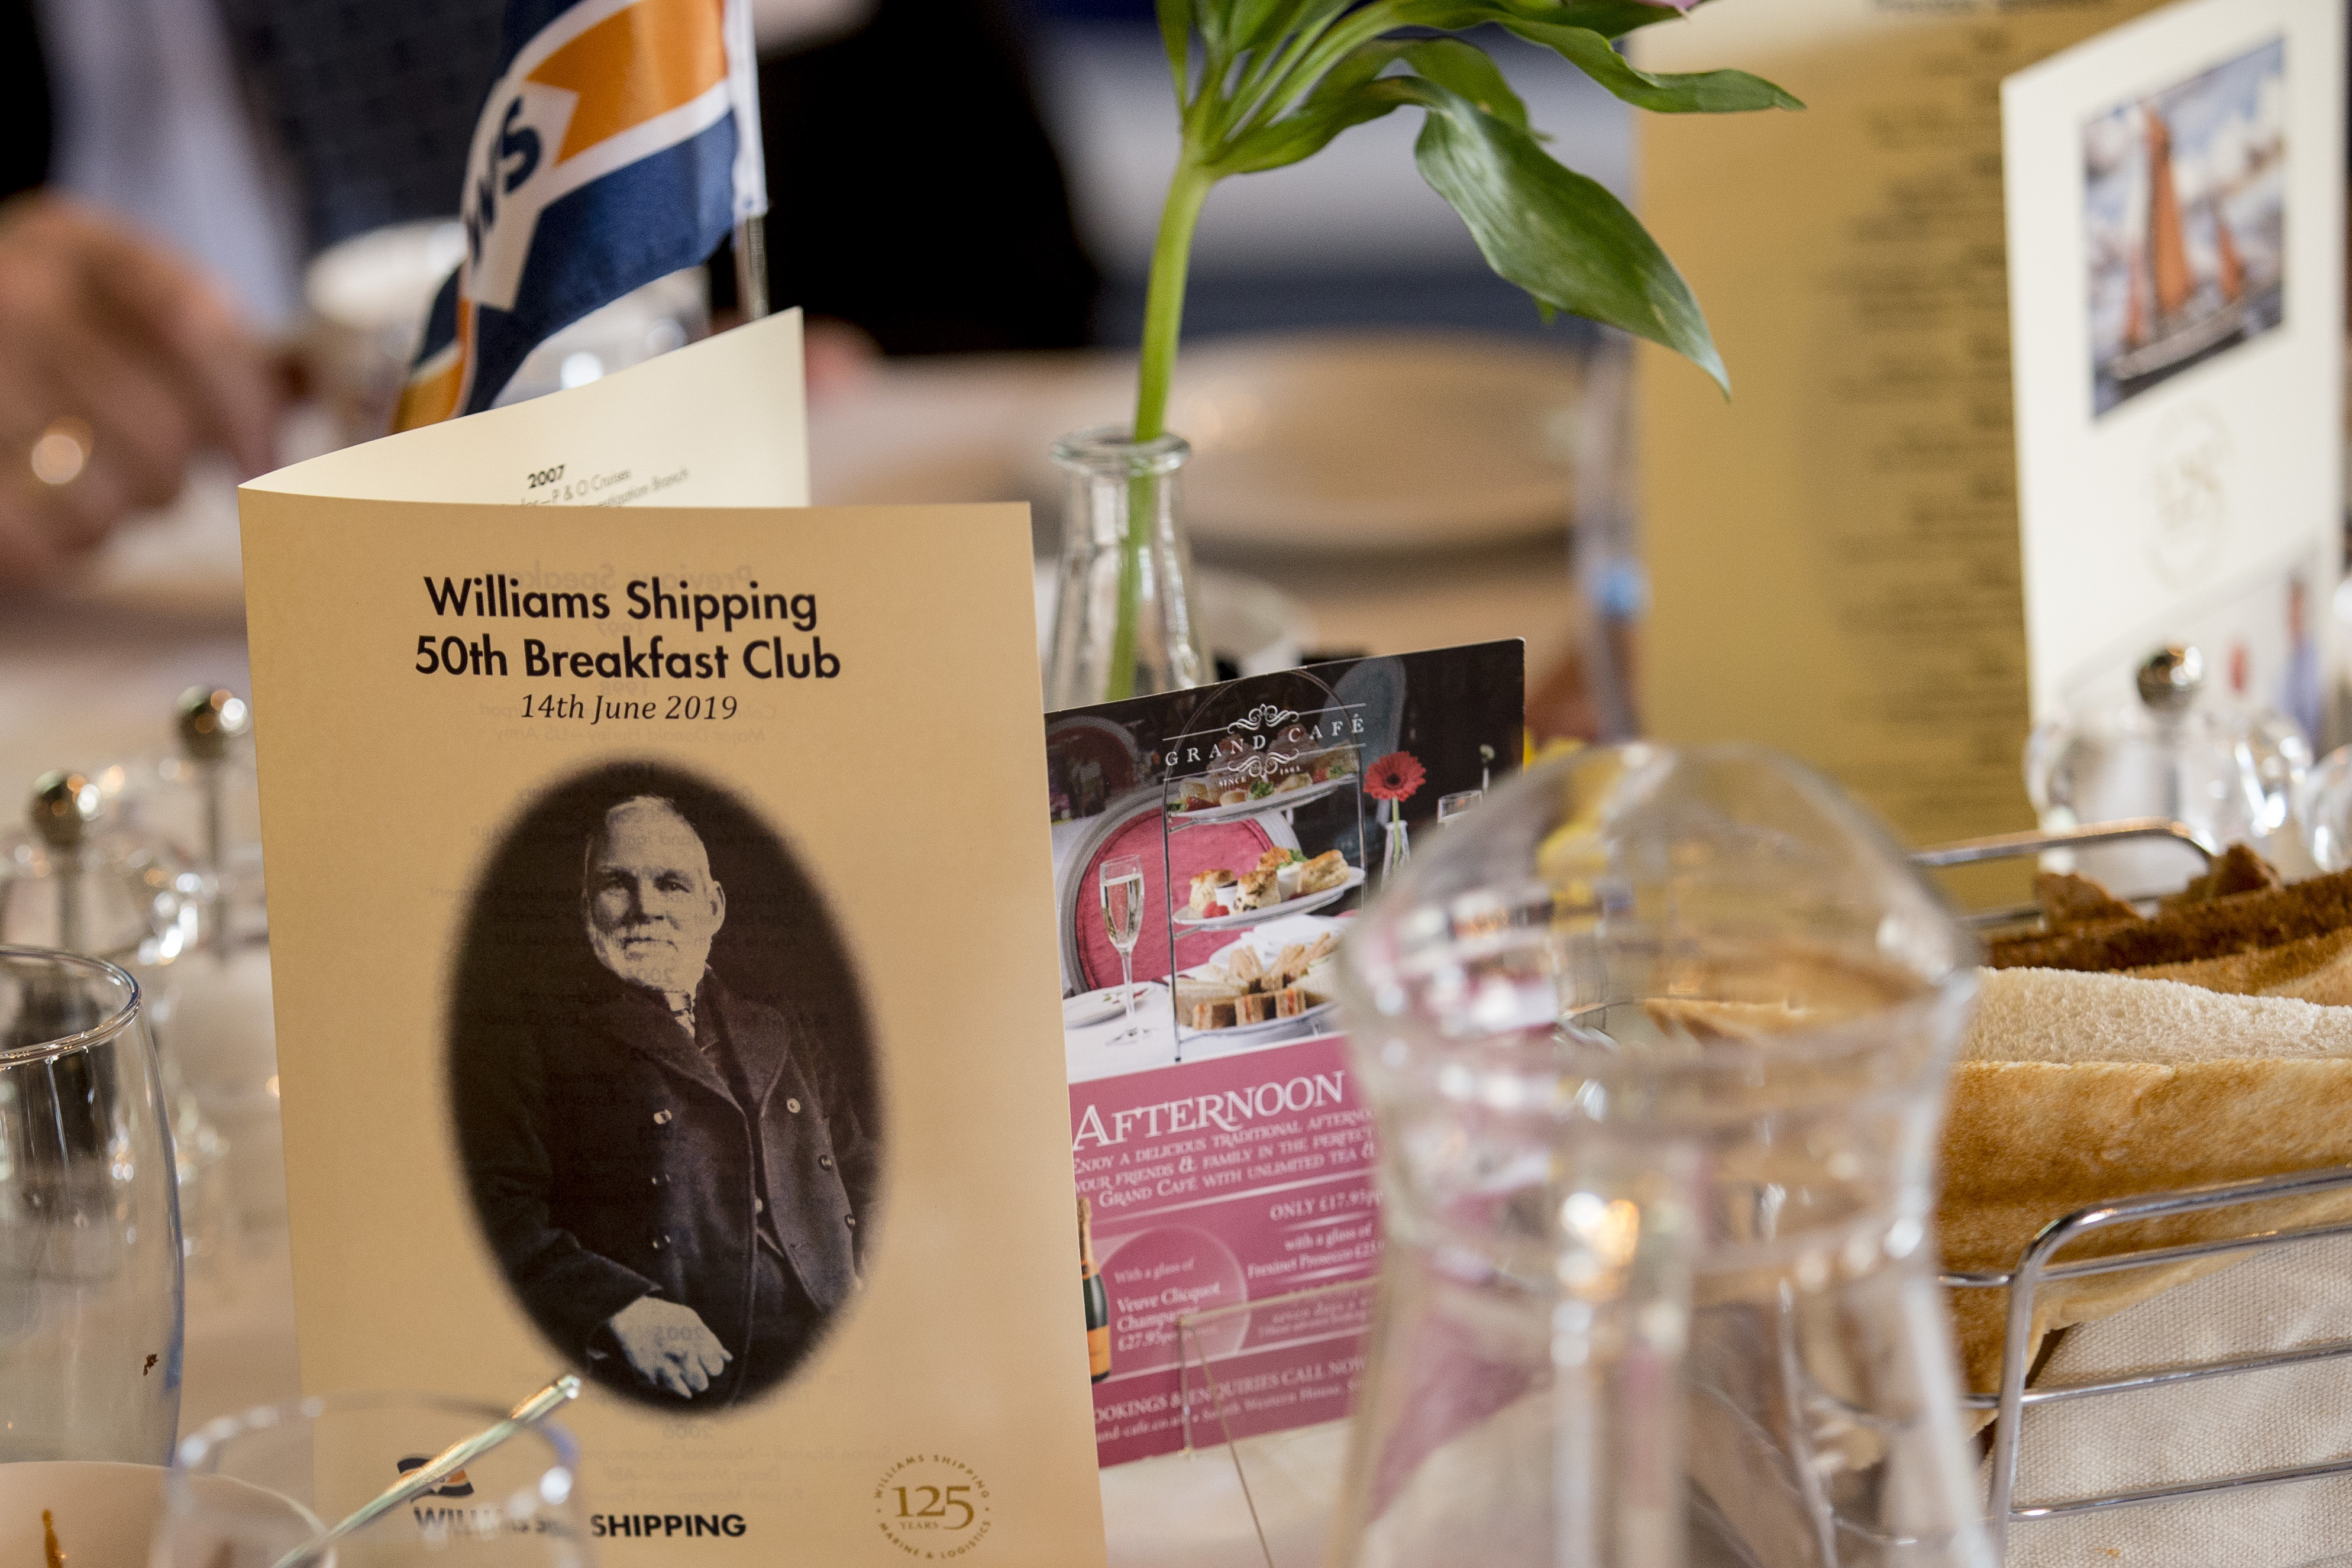 Williams Shipping 50th breakfast networking event